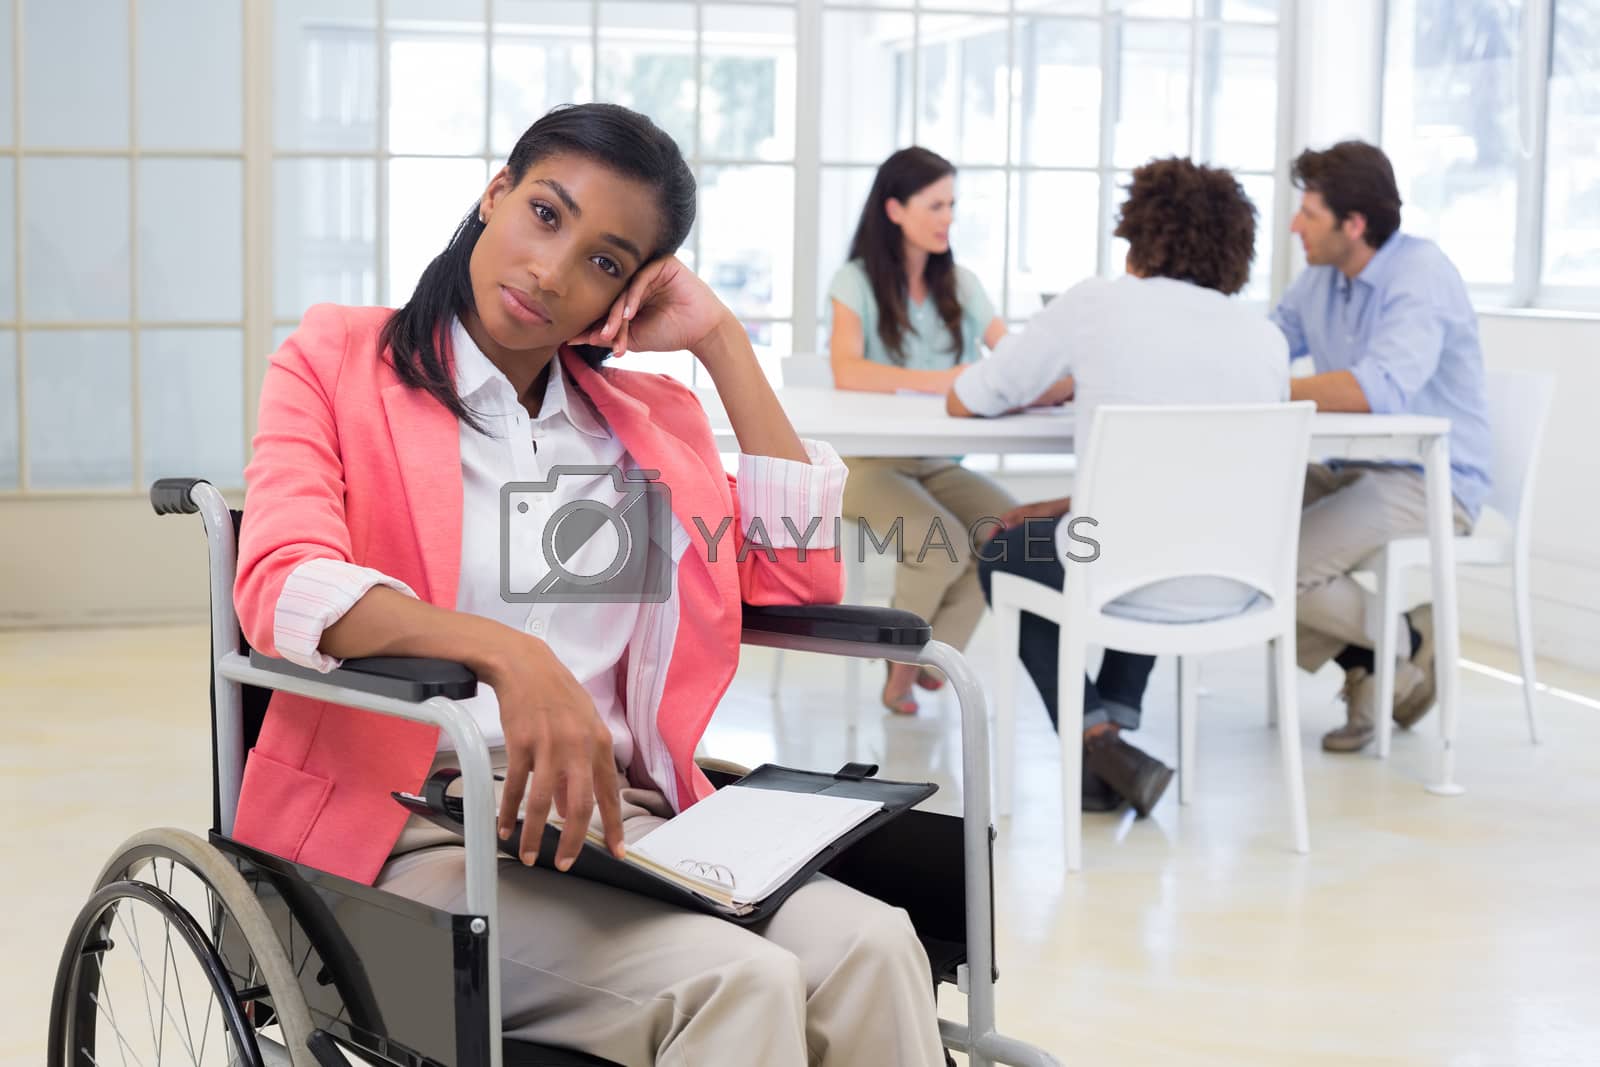 Royalty free image of Woman with disability frowning with coworkers are in background by Wavebreakmedia